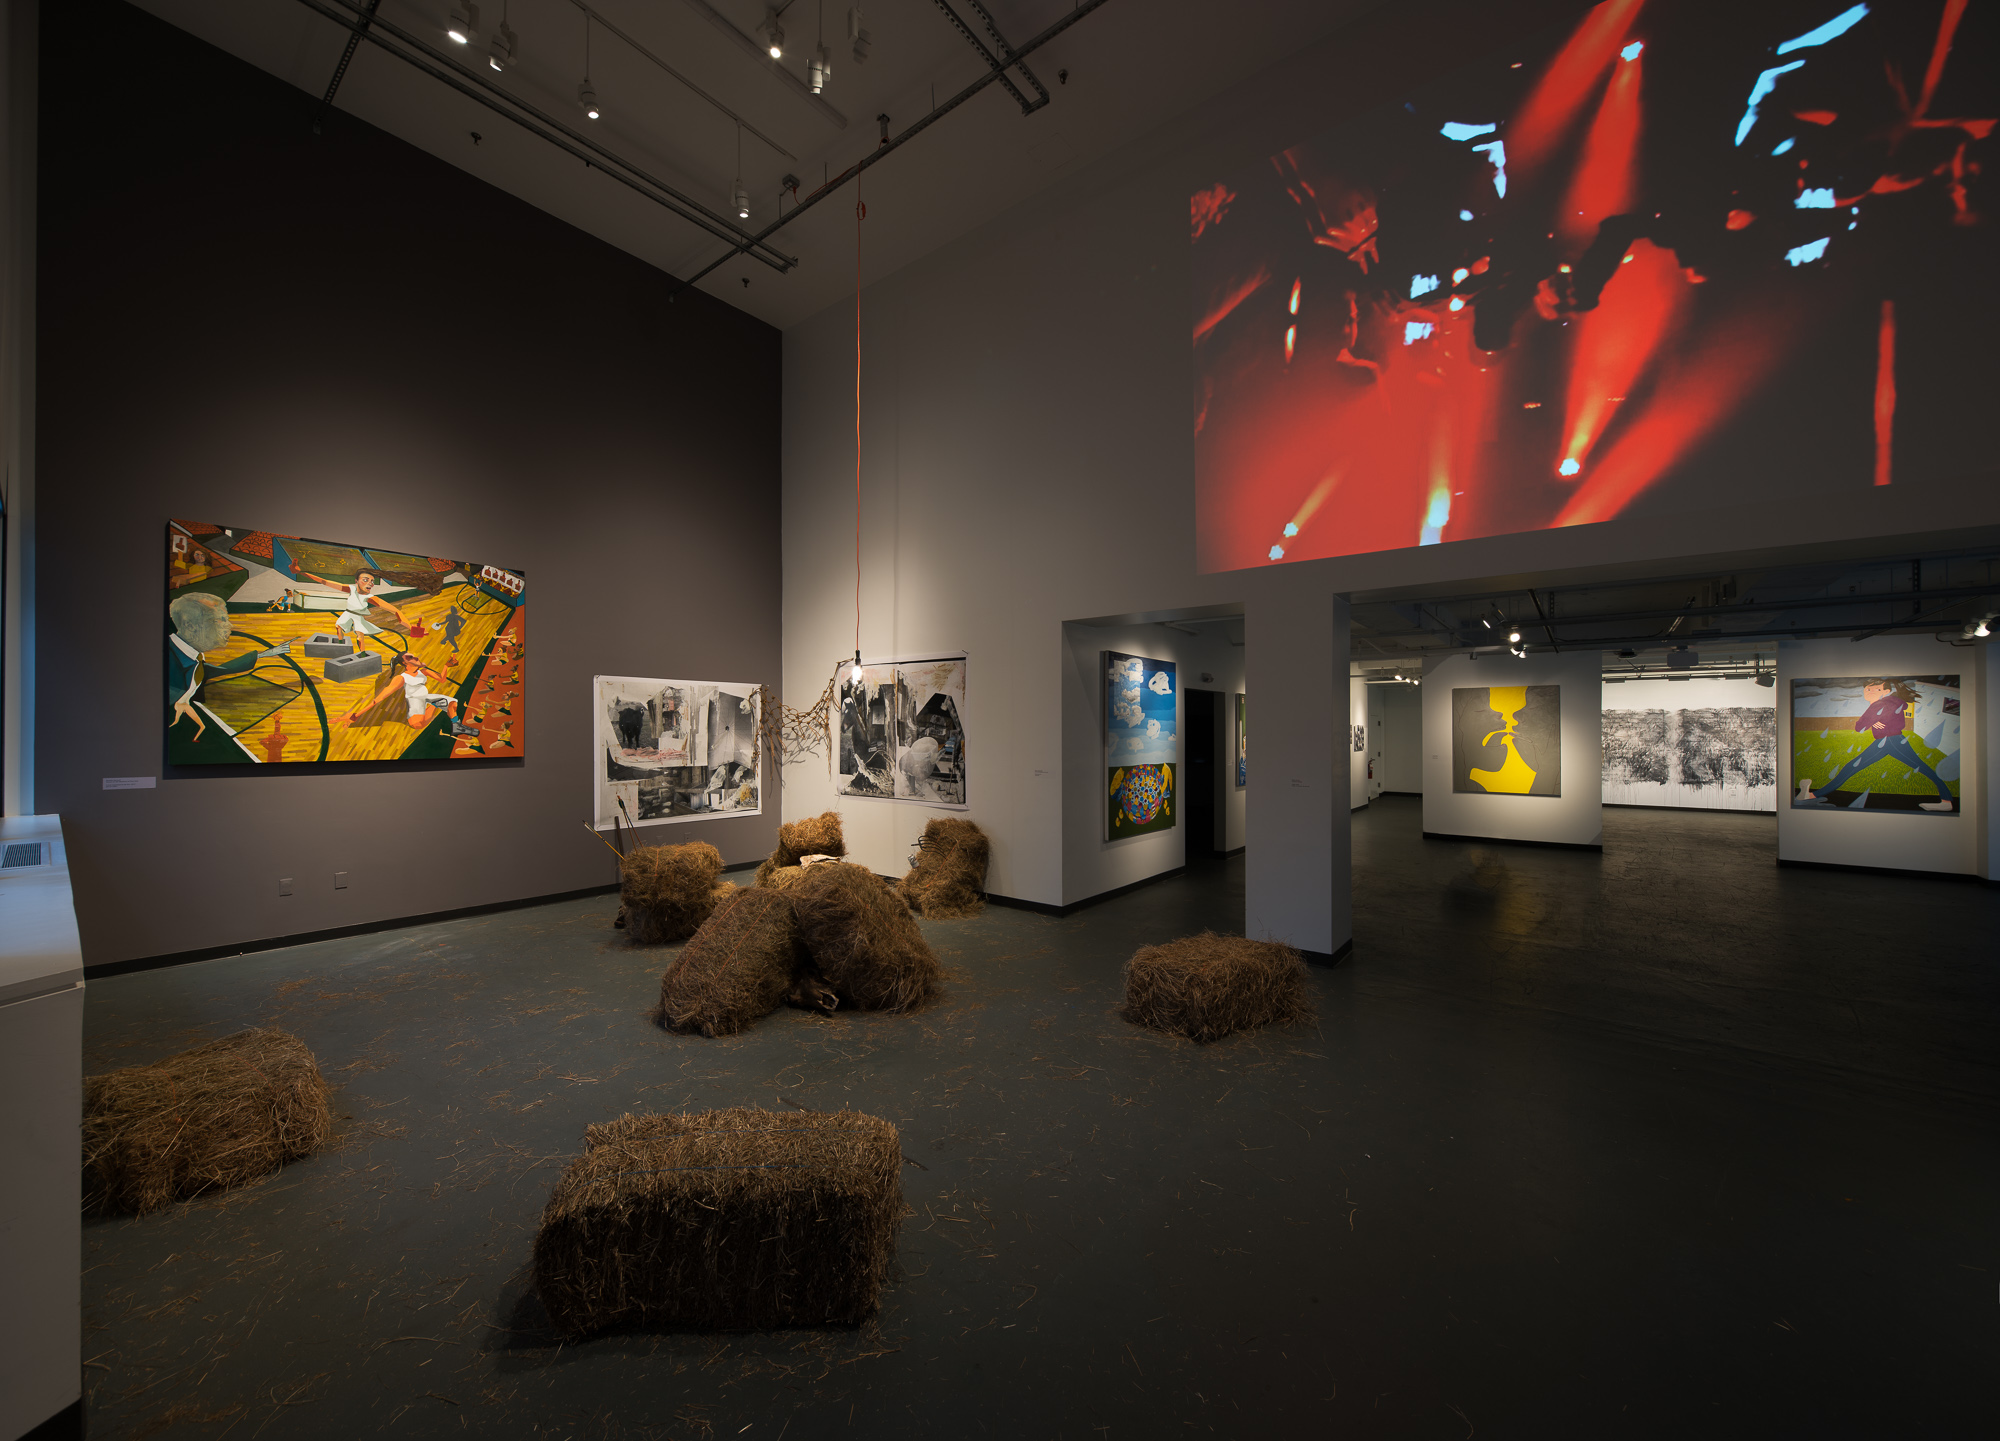 dissonance exhibit featuring paintings and projections on walls, hay bales on floor